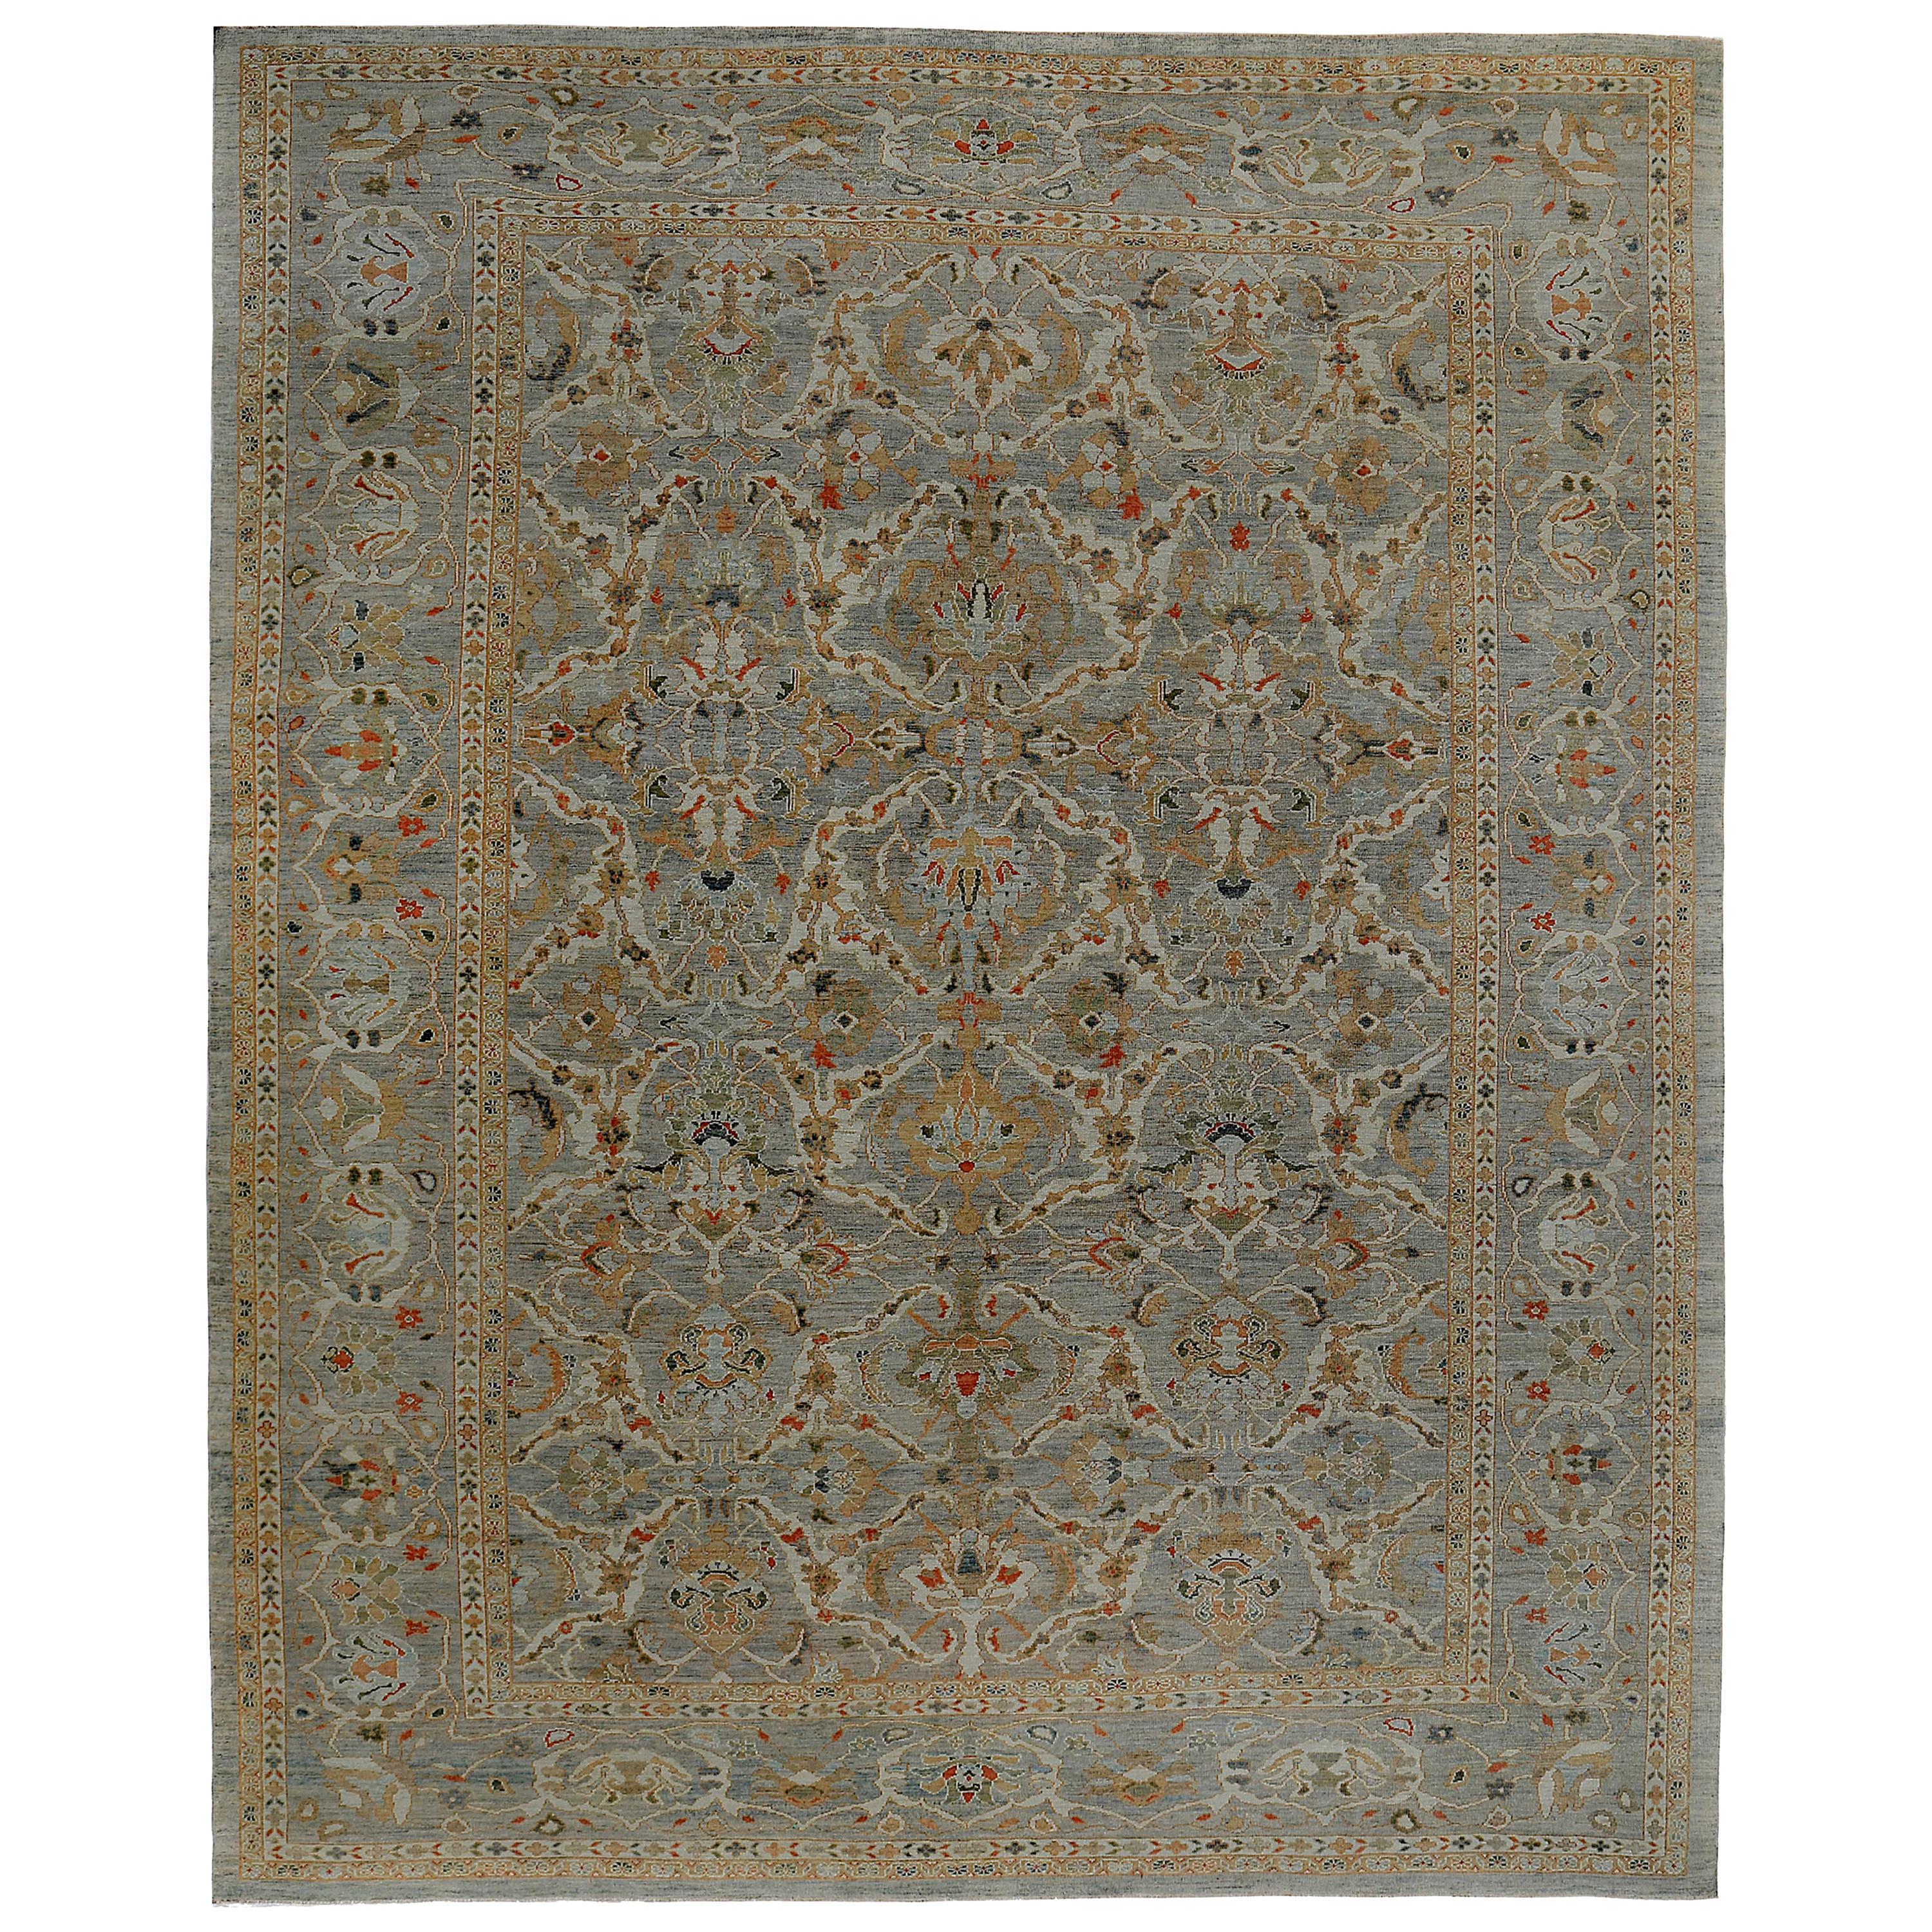 Oversize Turkish Rug Sultanabad Design with Navy and Red Botanical Details